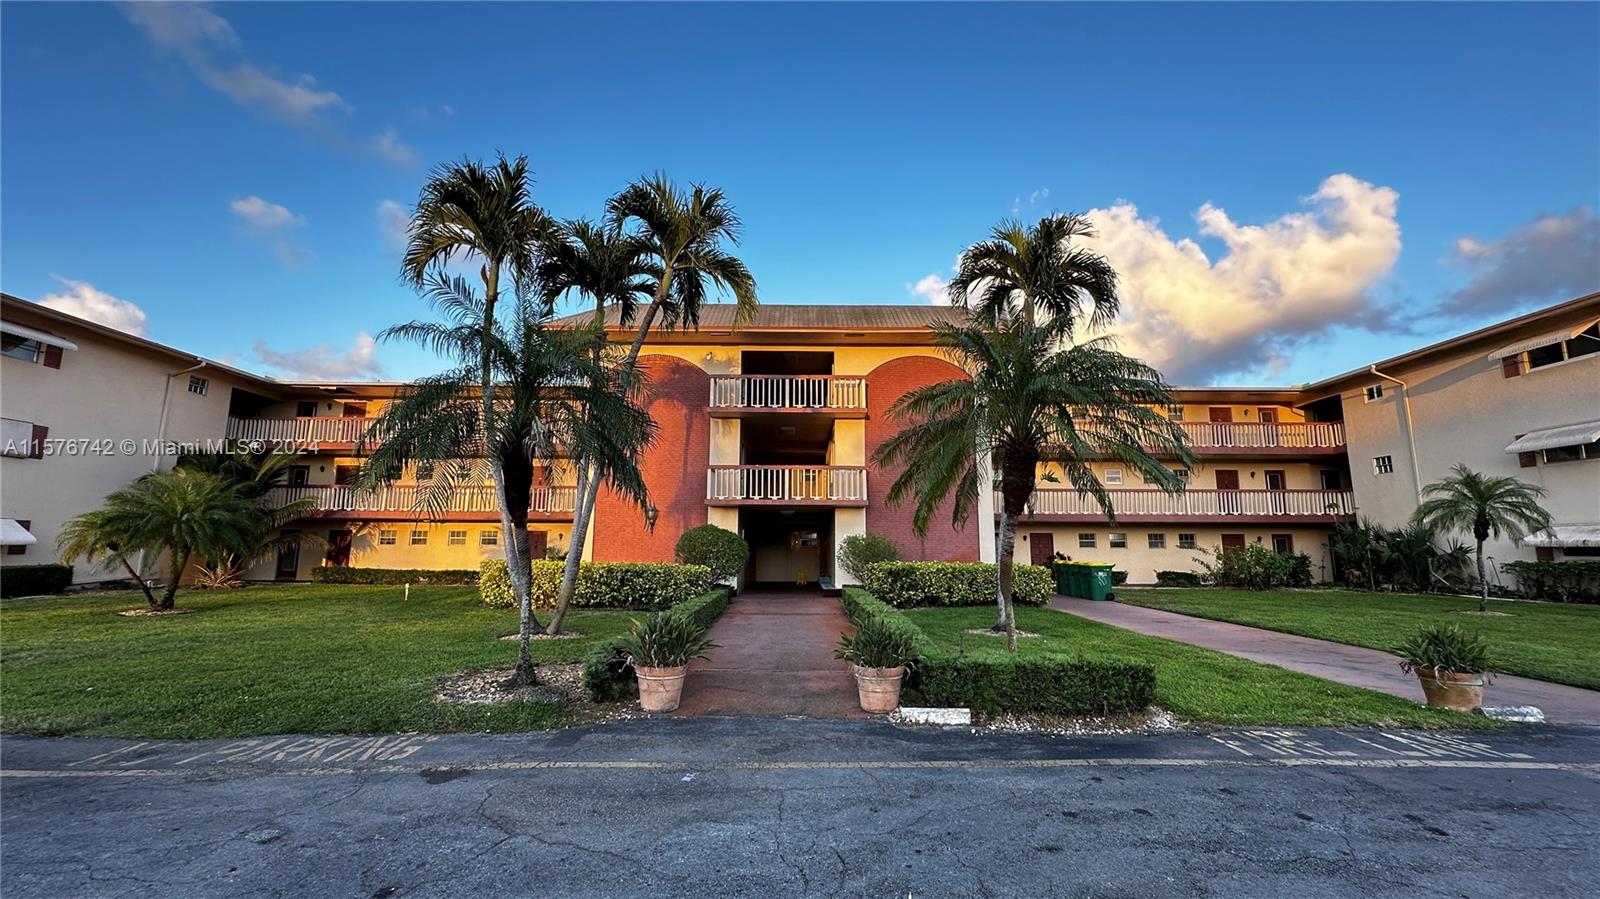 Undisclosed For Sale A11576742, FL